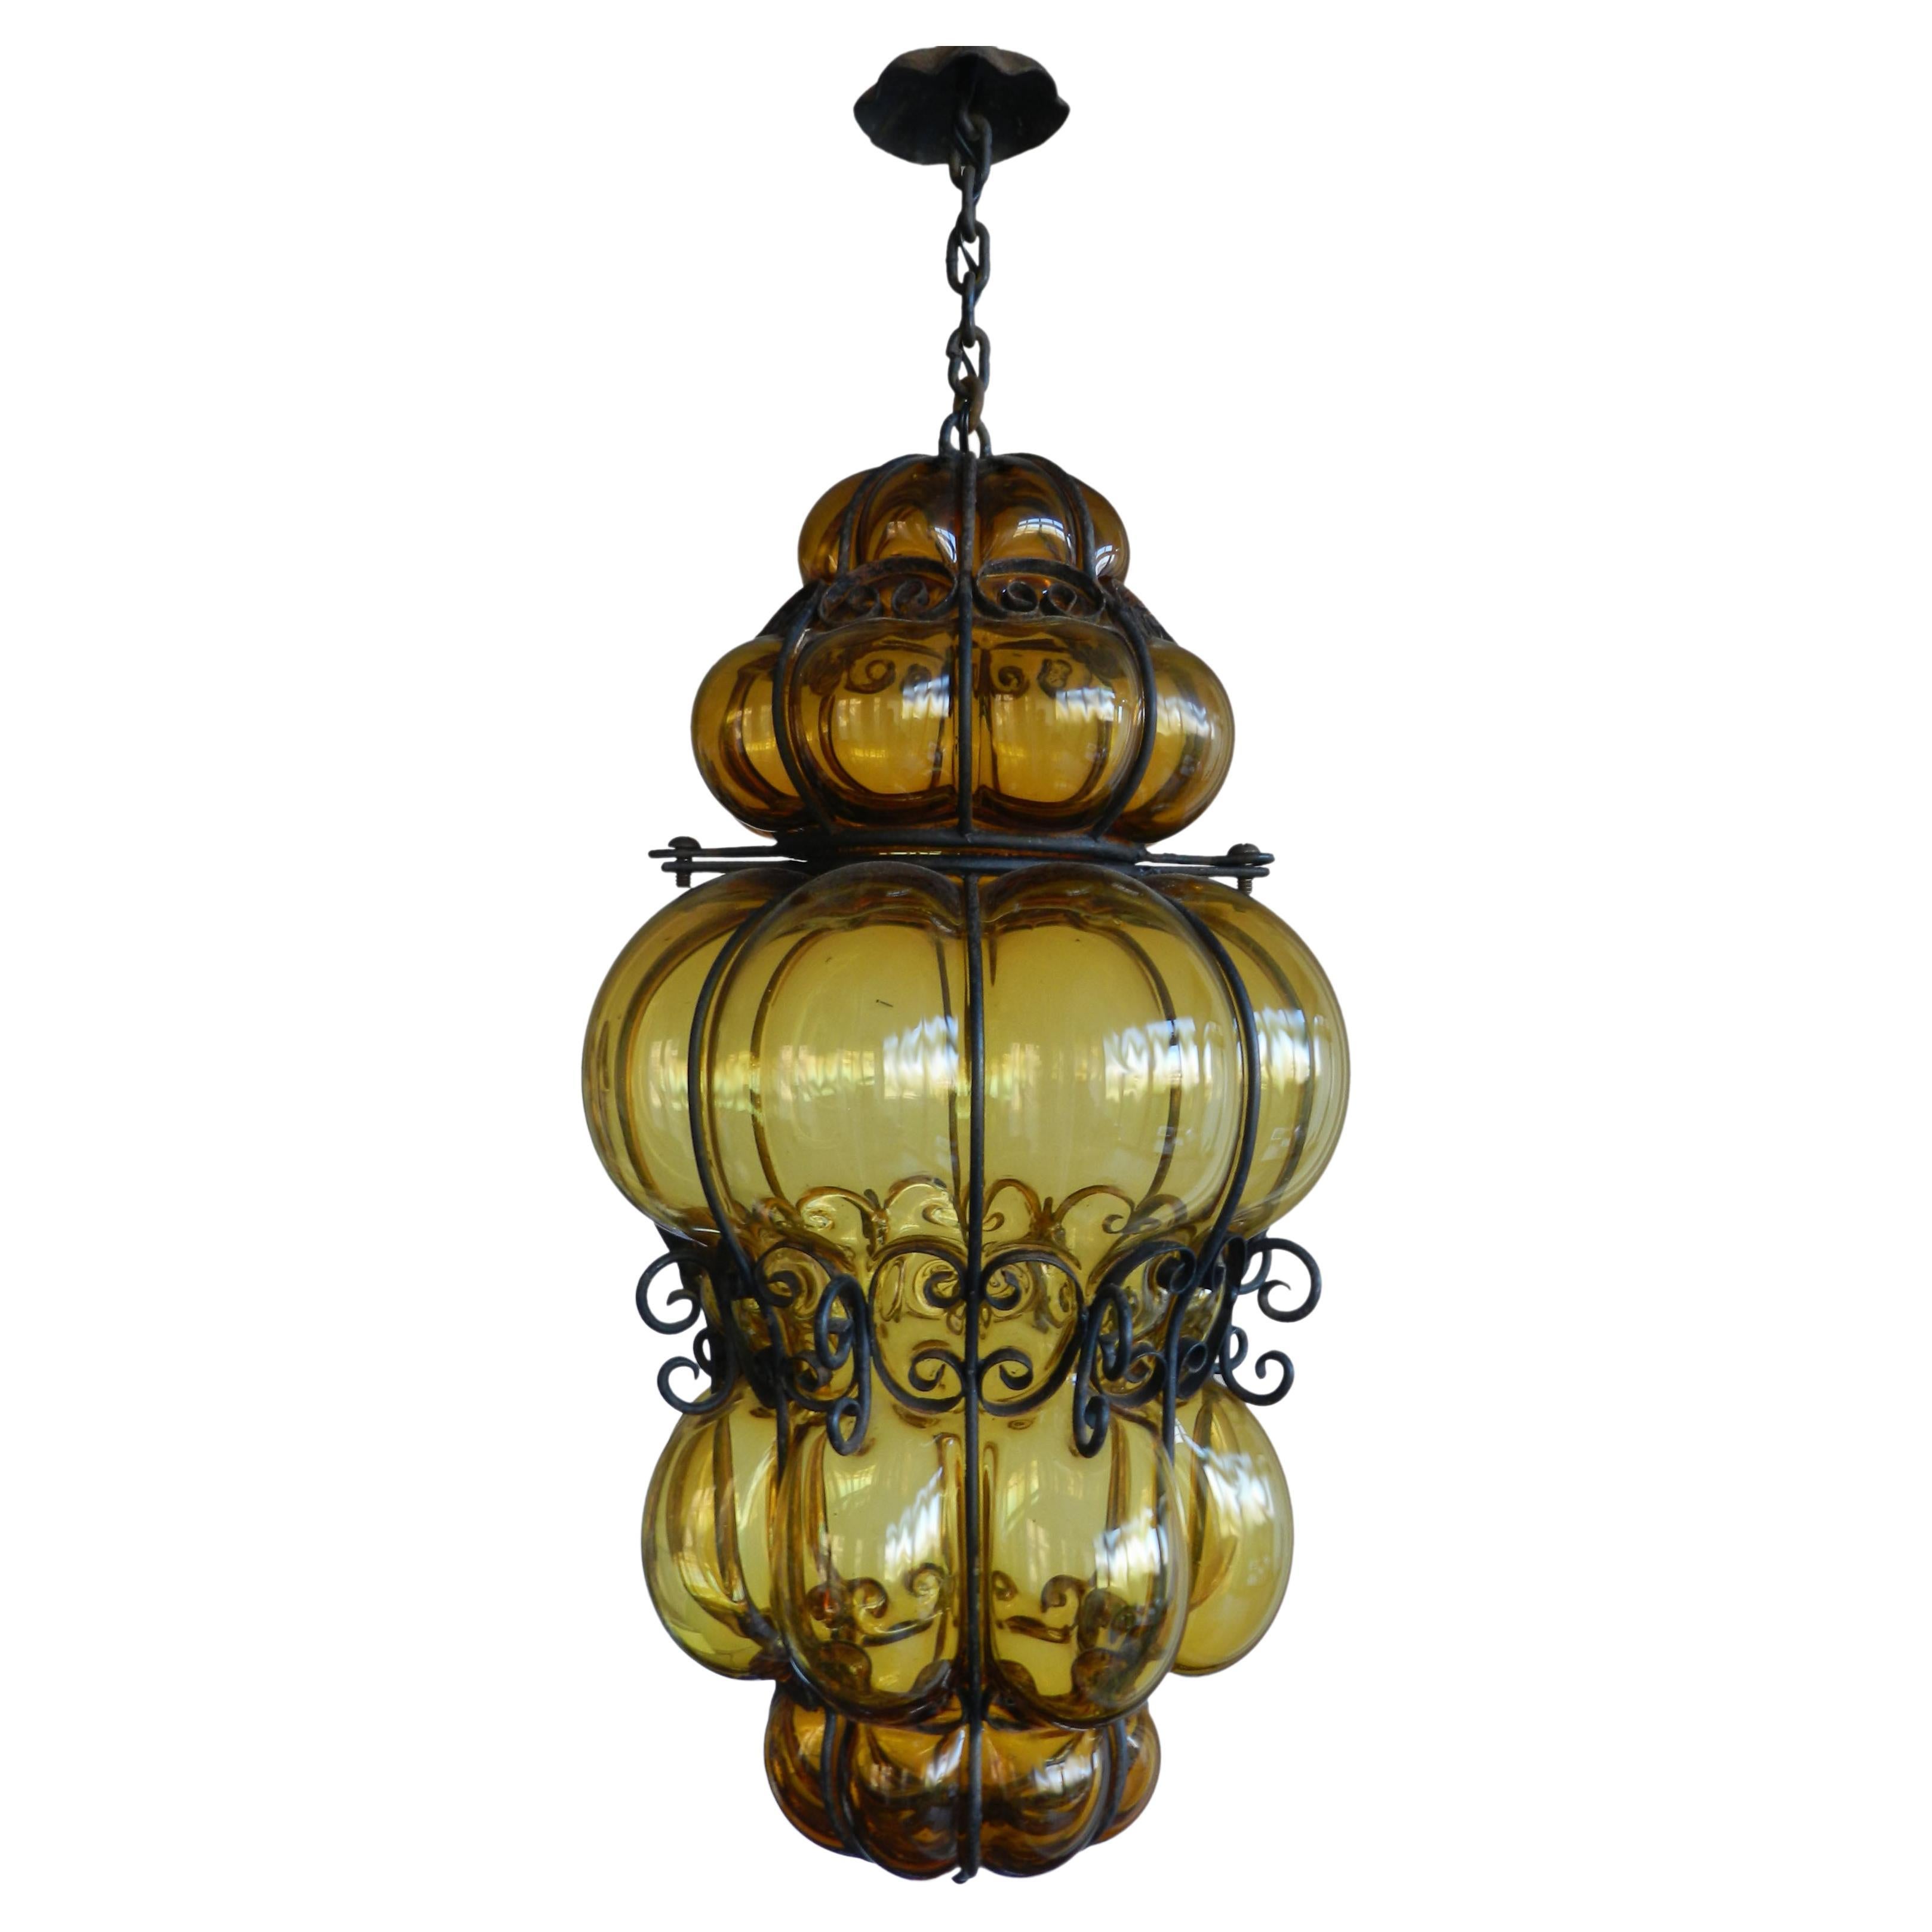 Seguso Murano pendant light Italian vintage handblown opalescent bubble glass midcentury
Unusual and Huge
Manufactured by Seguso in the 1950s.
It is made from handblown opalescent colored glass with a bronzed metal cage.
Measurements given below are